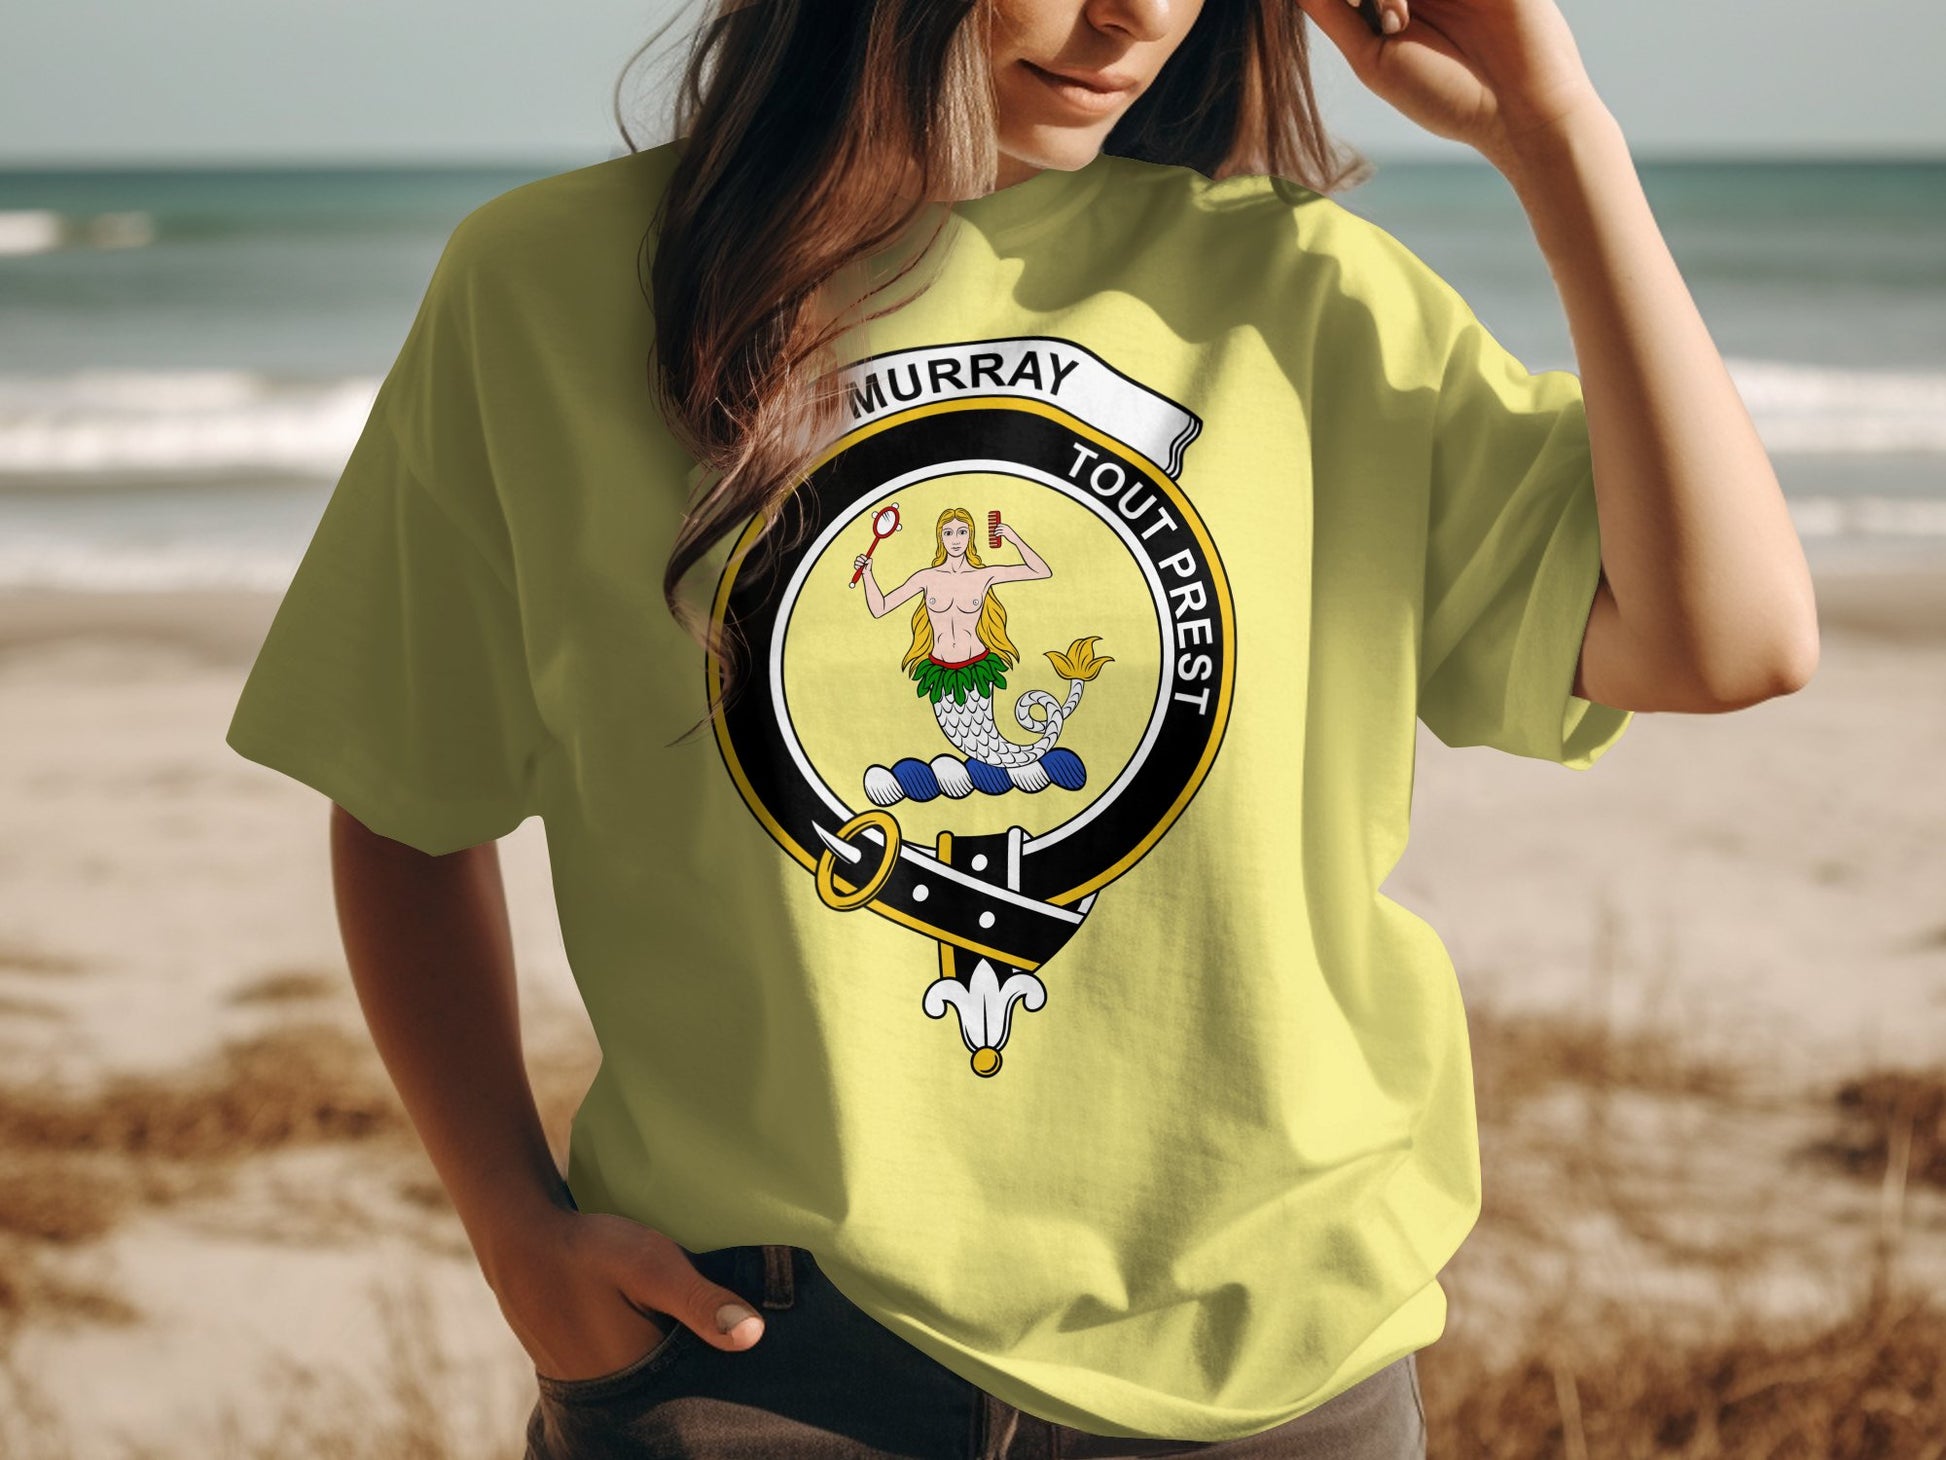 Murray Scottish Clan Family Crest T-Shirt - Living Stone Gifts